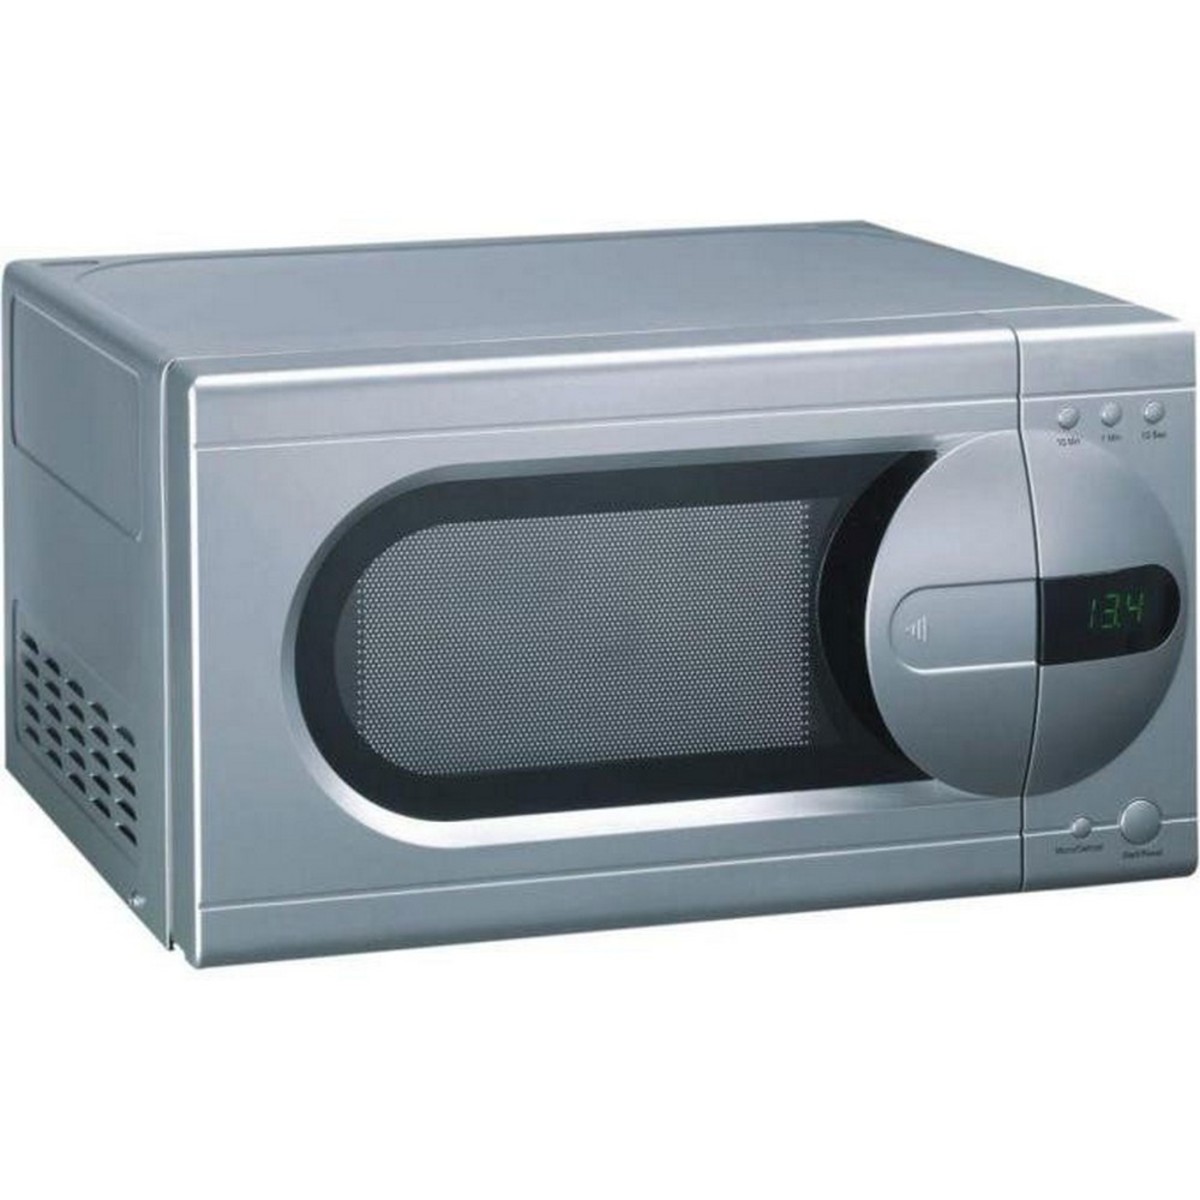 Ignis Microwave Oven With Grill MMF207G 20 Ltr